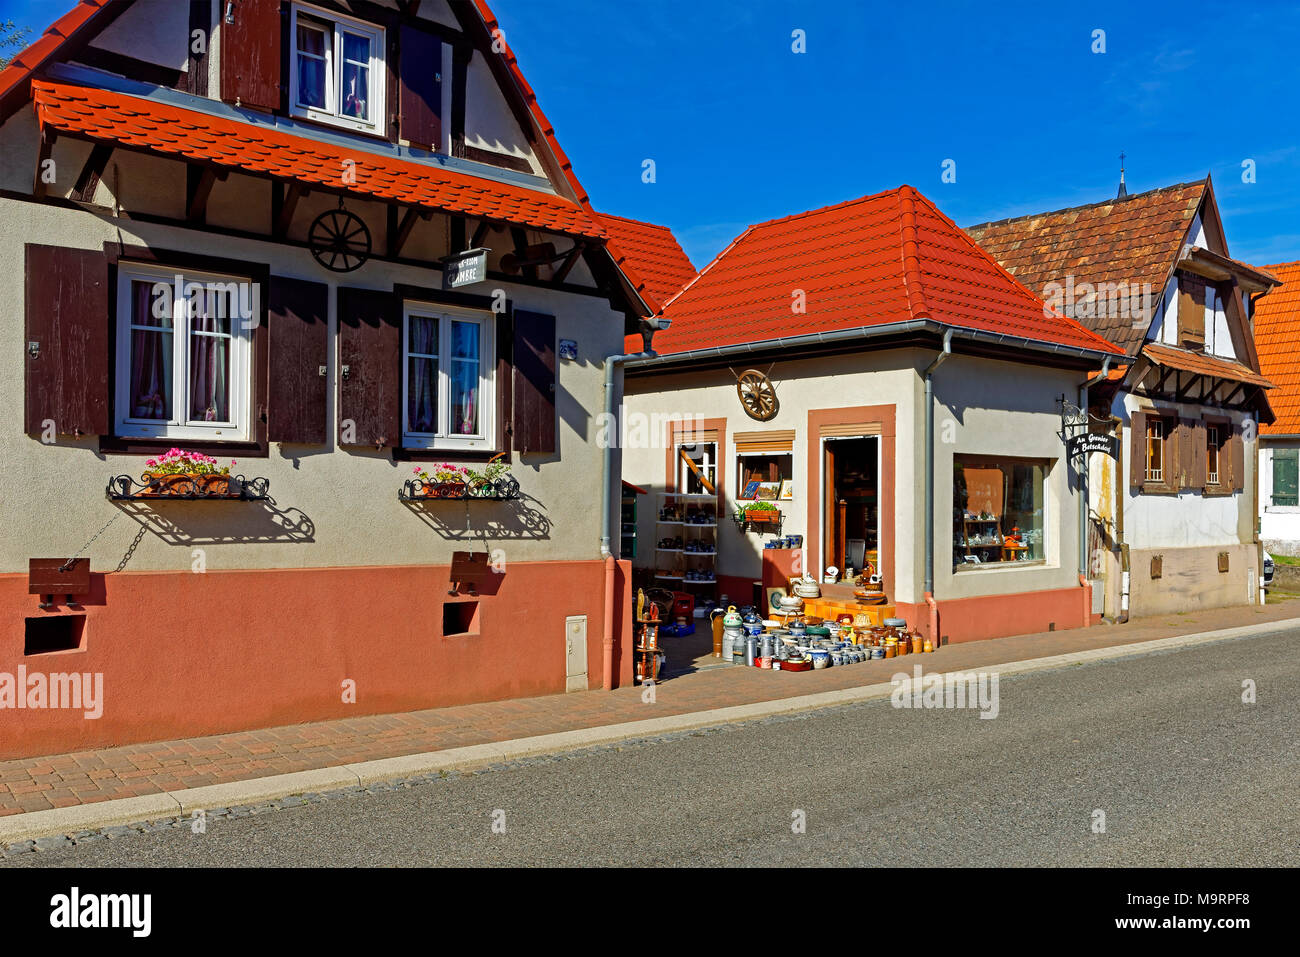 Europe, France, the Rhine, Bas (Alsace), village Betsch, Rue of the Potiers, street view, Poterie, pottery, exhibition, architecture, flowers, buildin Stock Photo